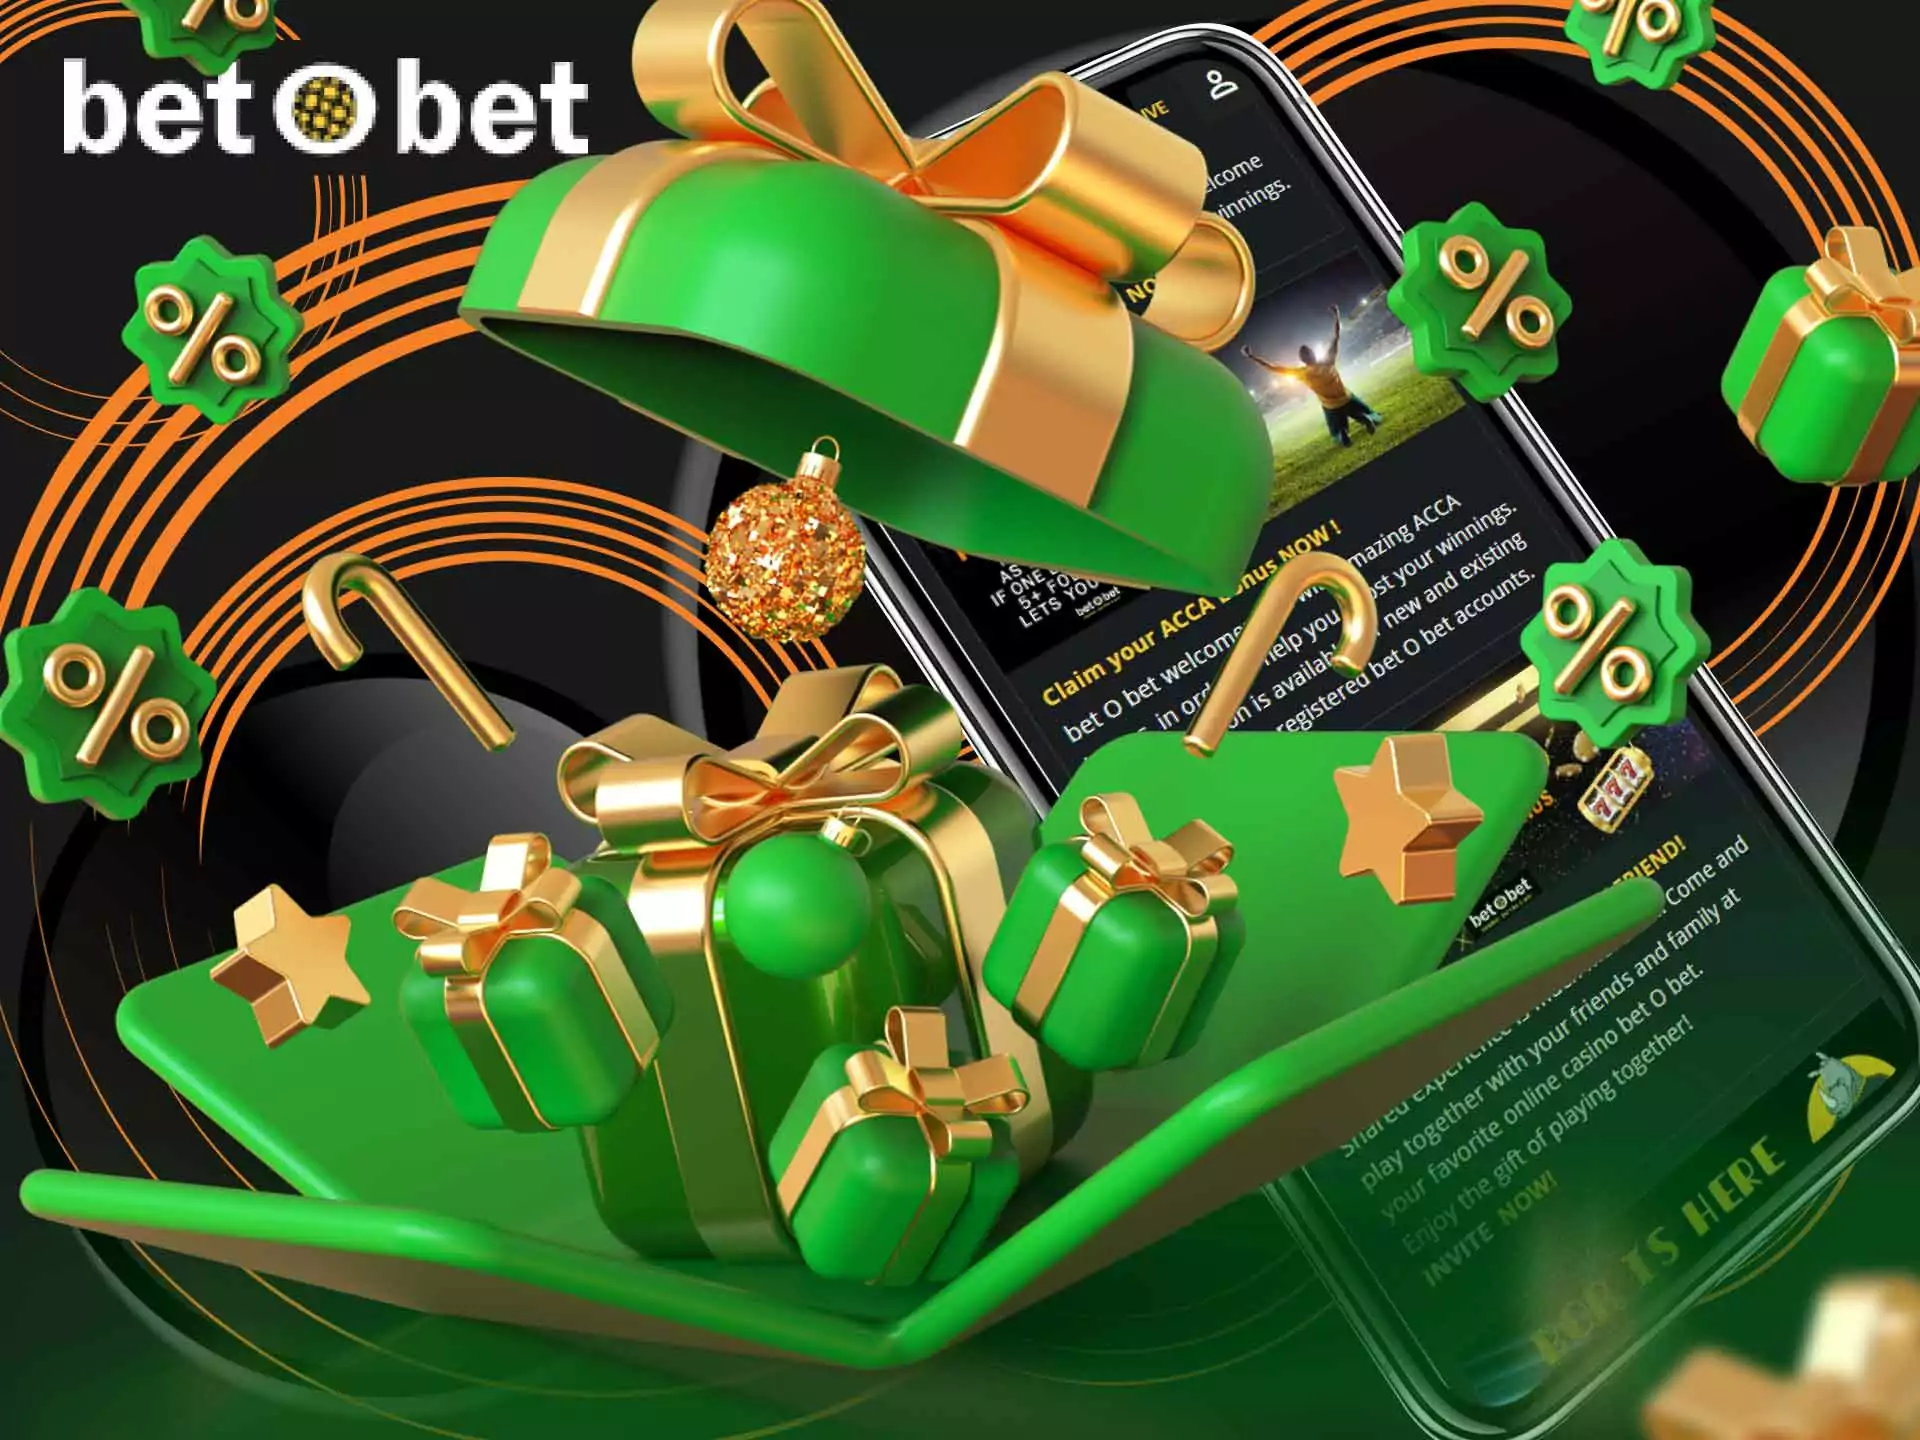 Find the other bonuses on the BetOBet promotion page.